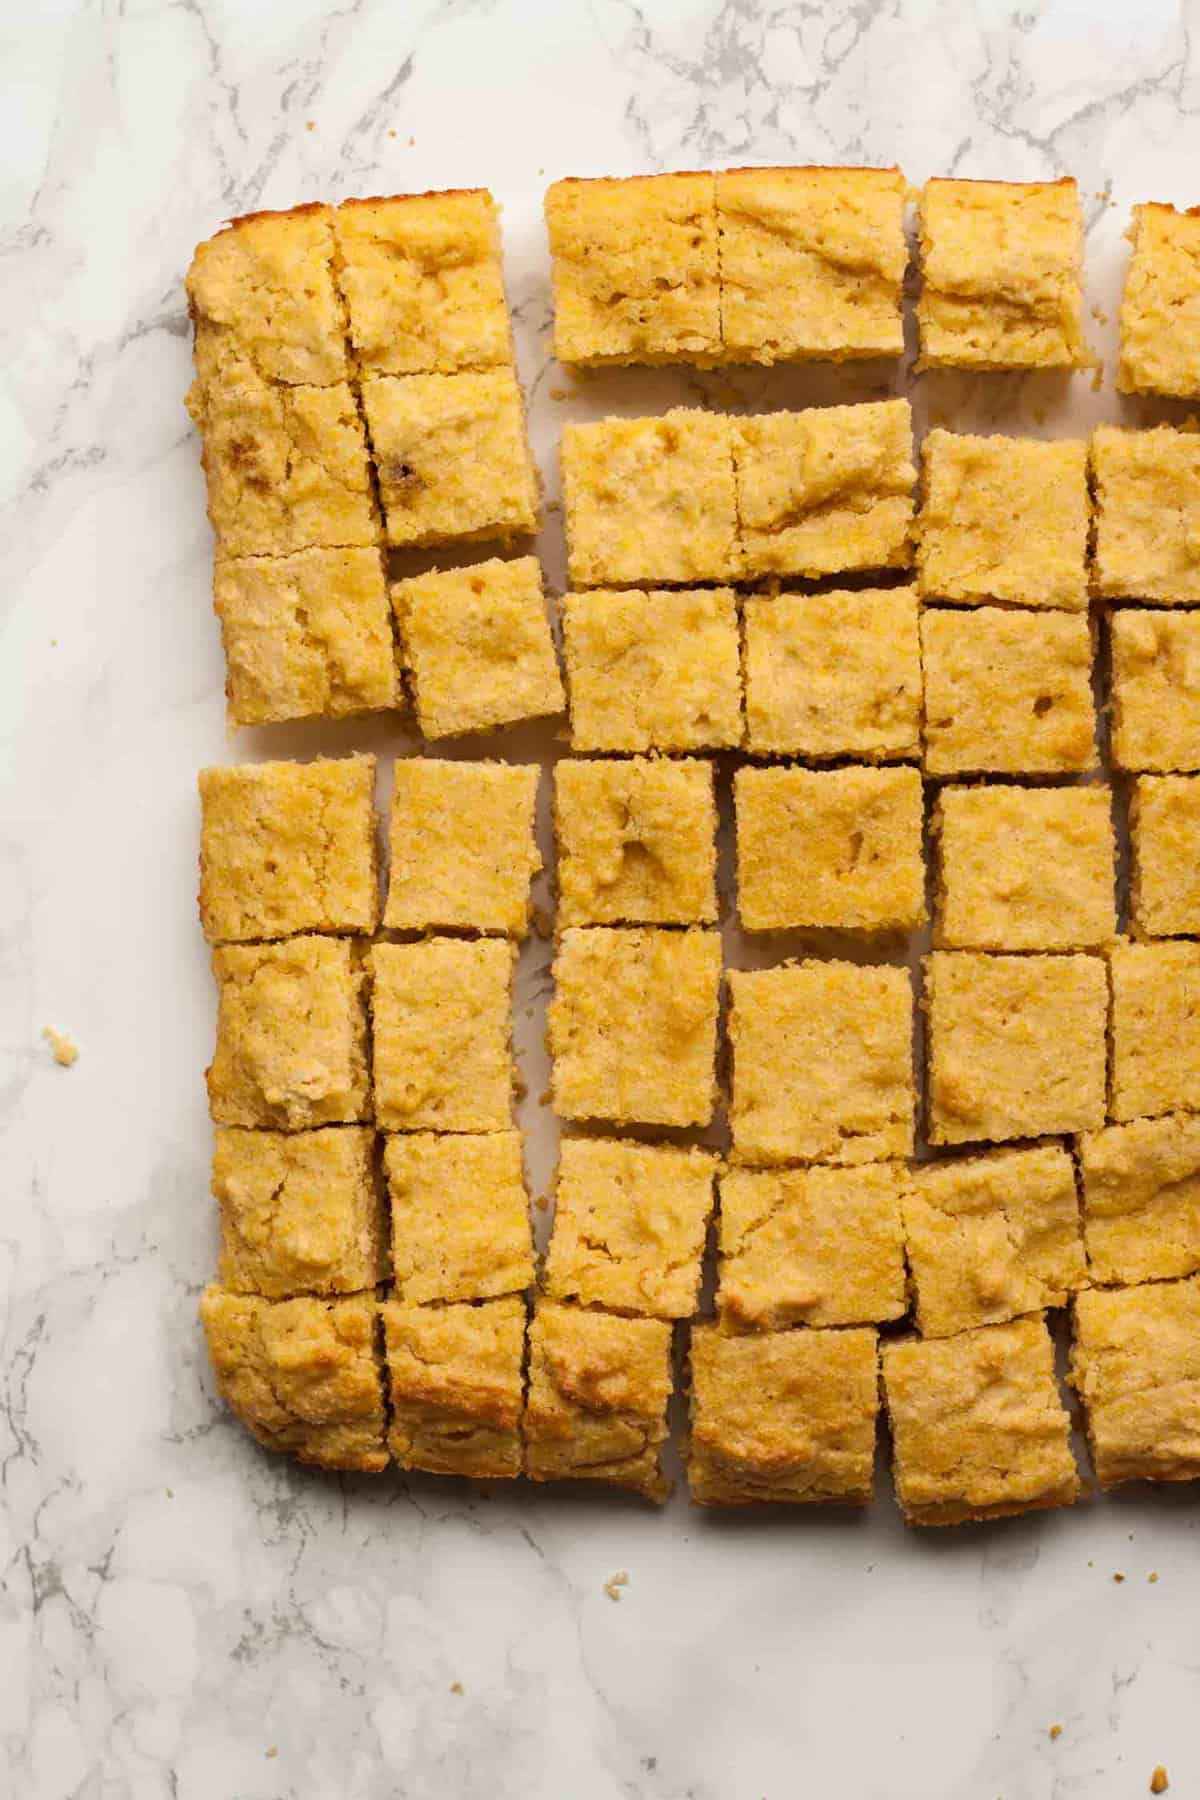 Cubed cornbread on a marble work top.